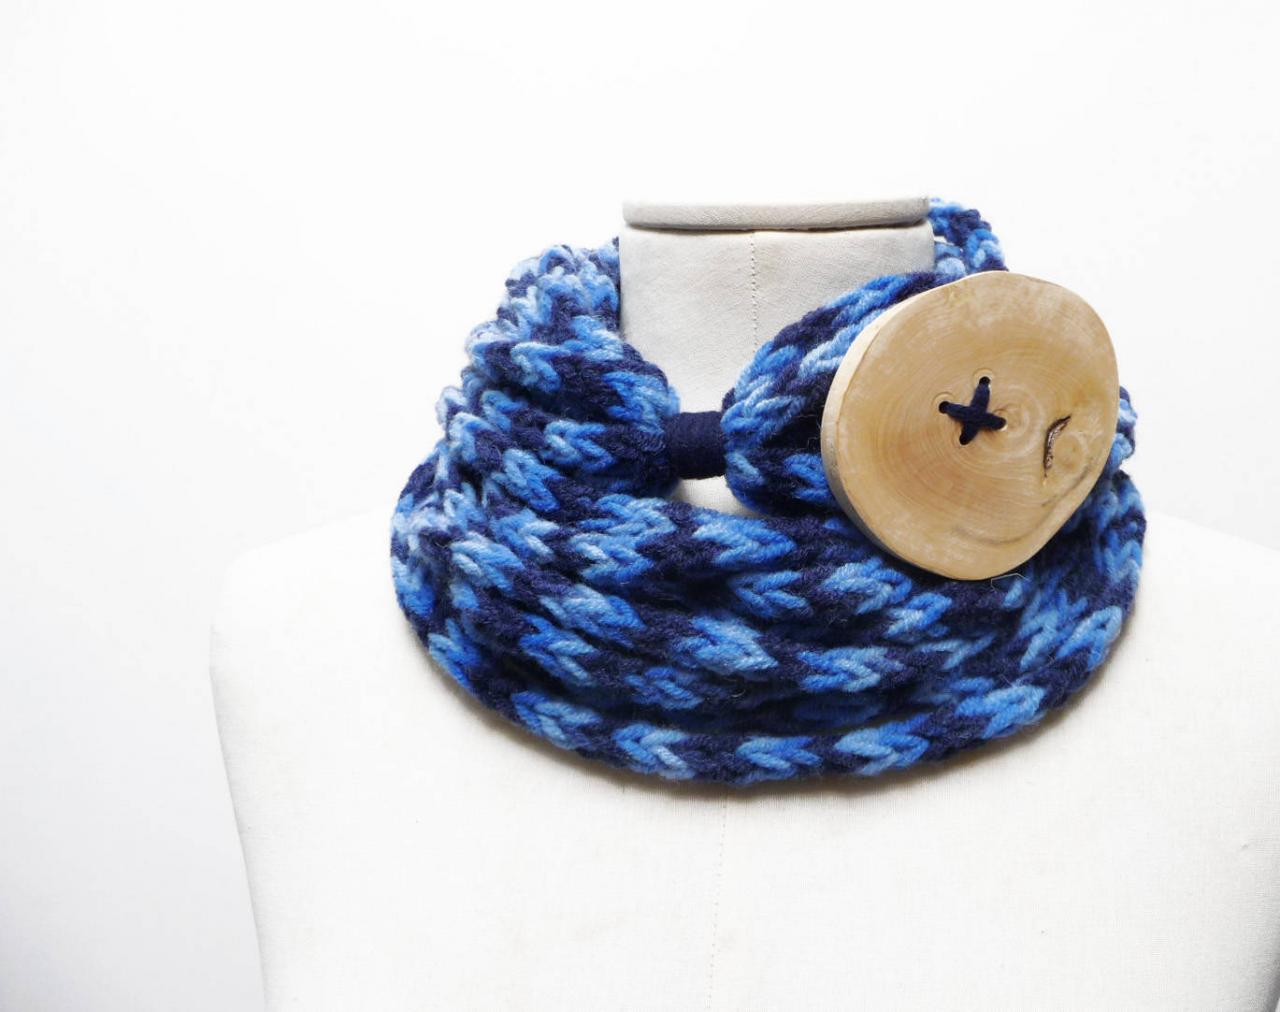 Loop Scarf Necklace, Infinity Scarf, Crochet Chunky Cowl Neckwarmer - blue shaded yarn with extra giant wood button